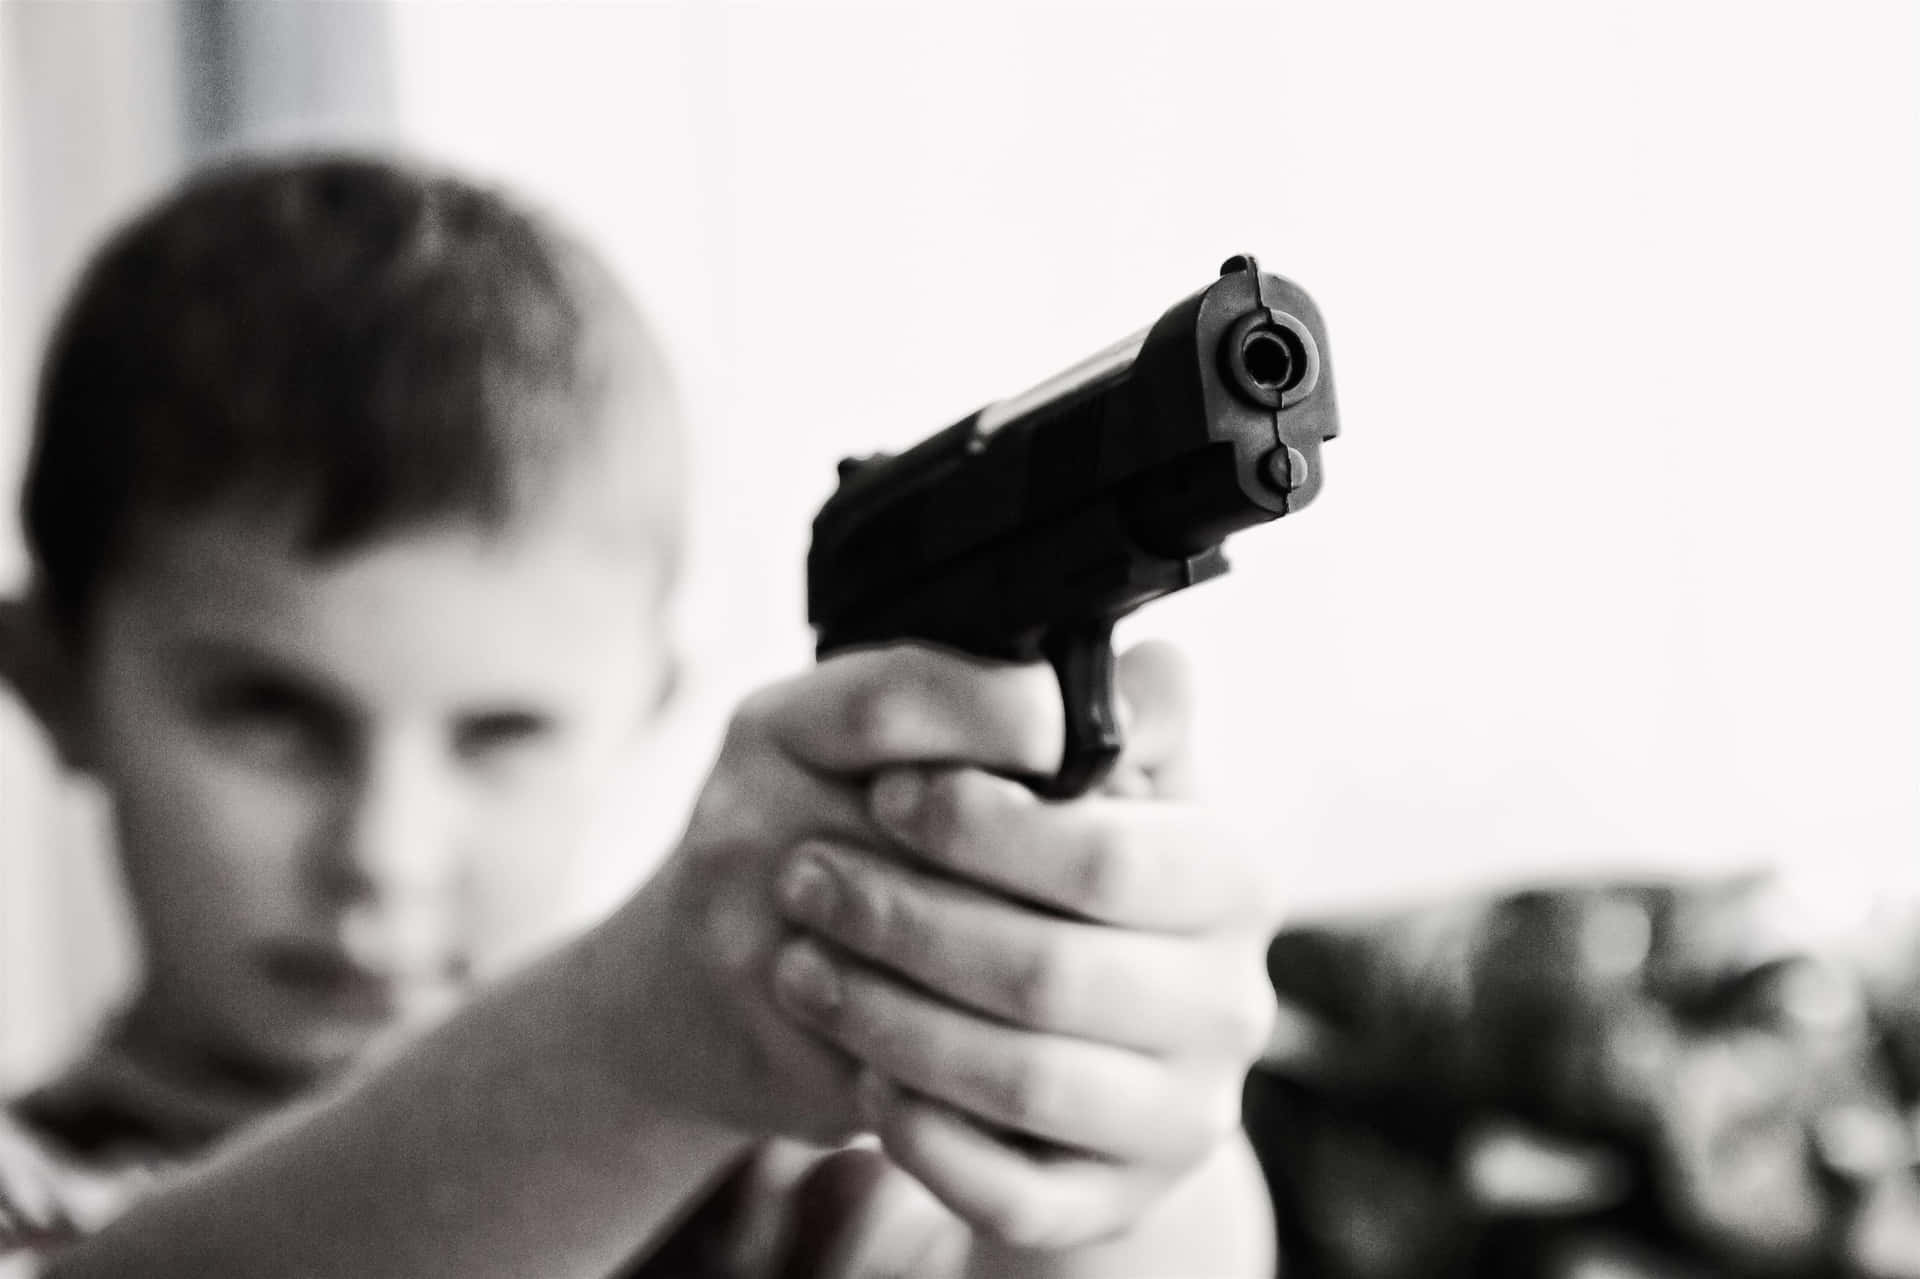 A Boy Is Holding A Gun In His Hand